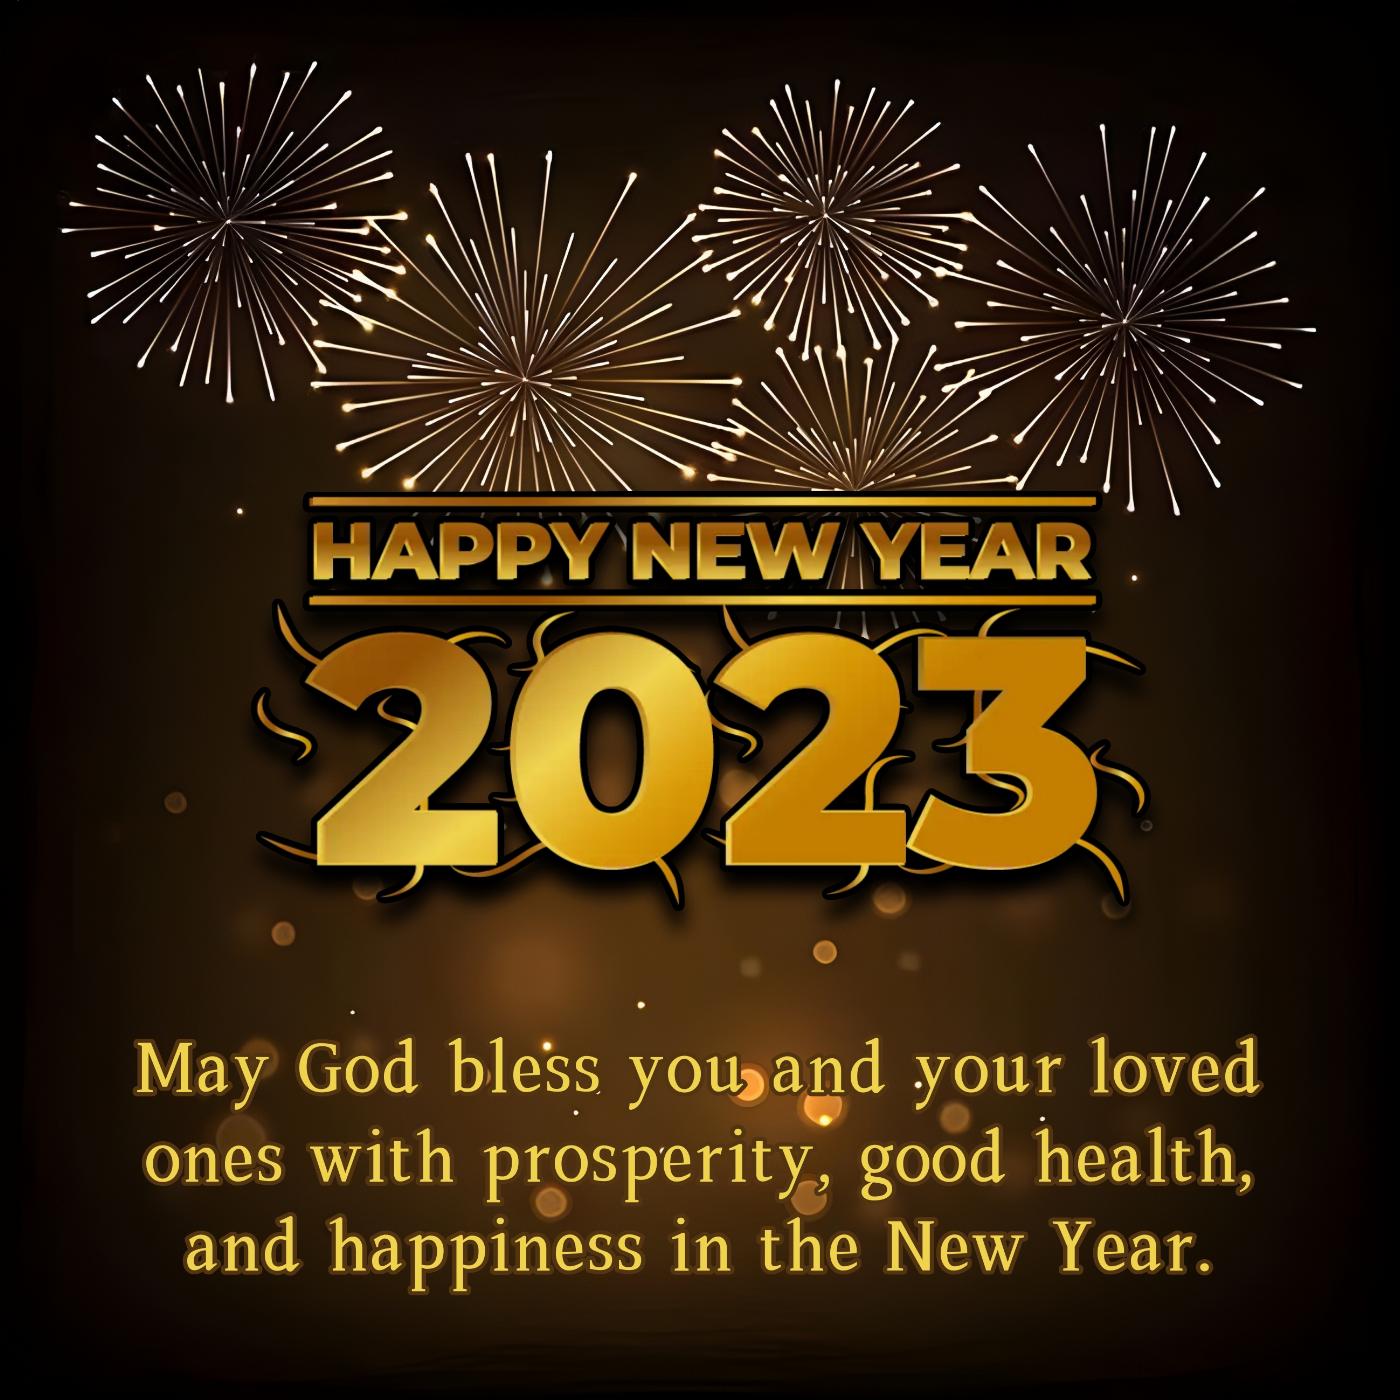 May God bless you and your loved ones with prosperity